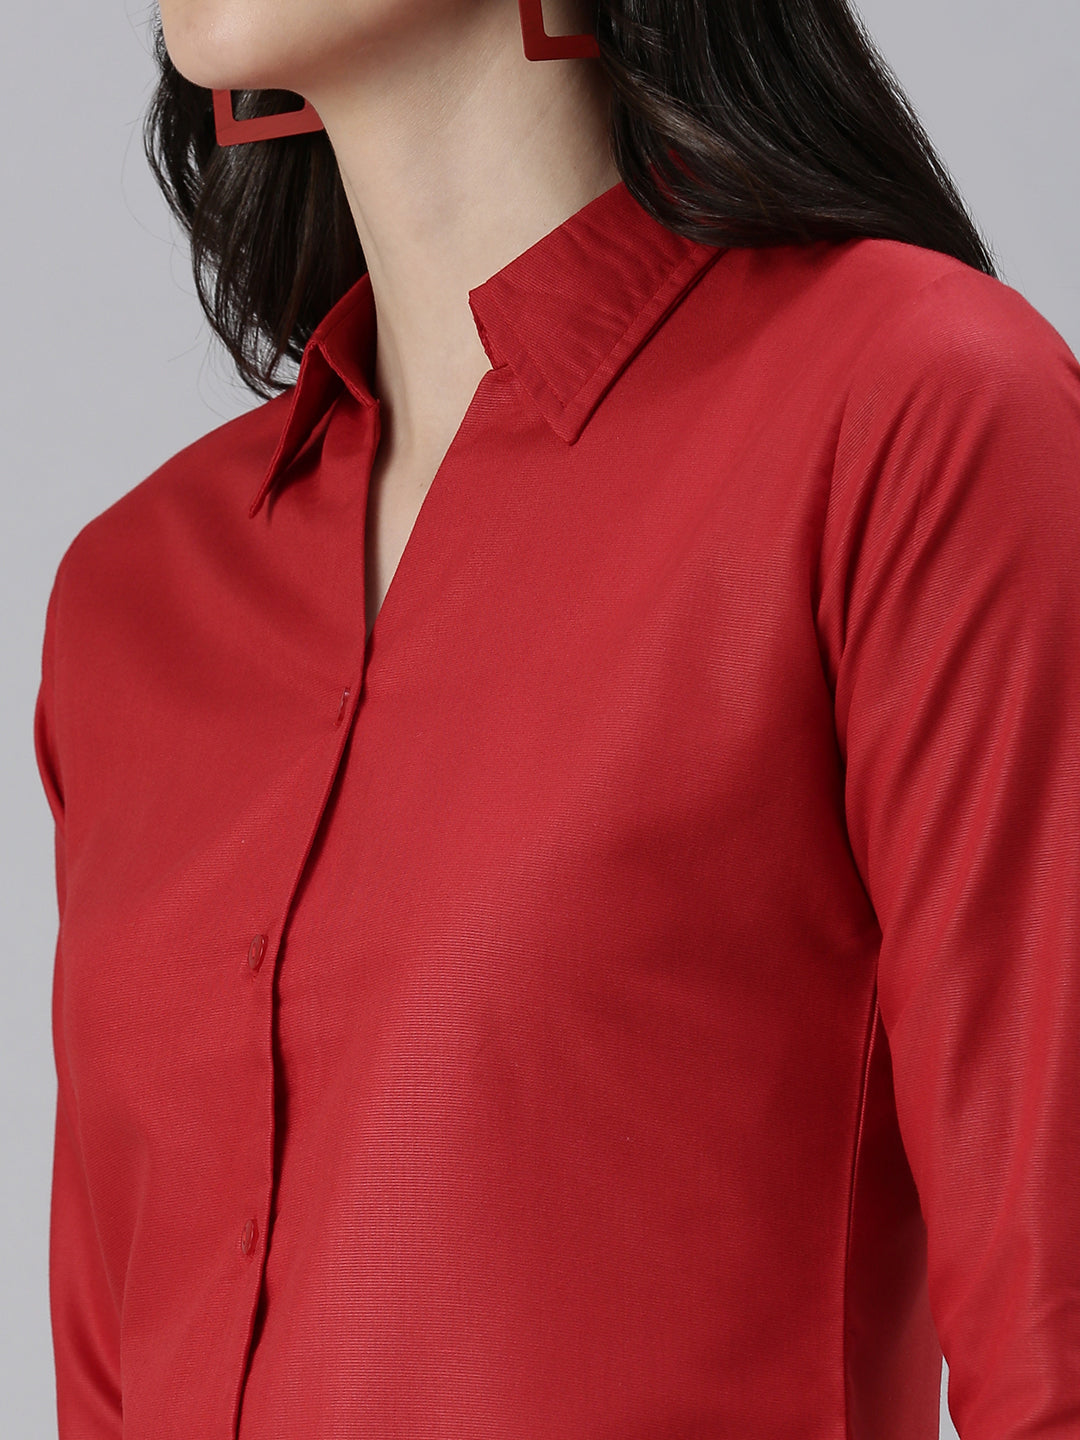 Women's Red Solid Casual Shirts